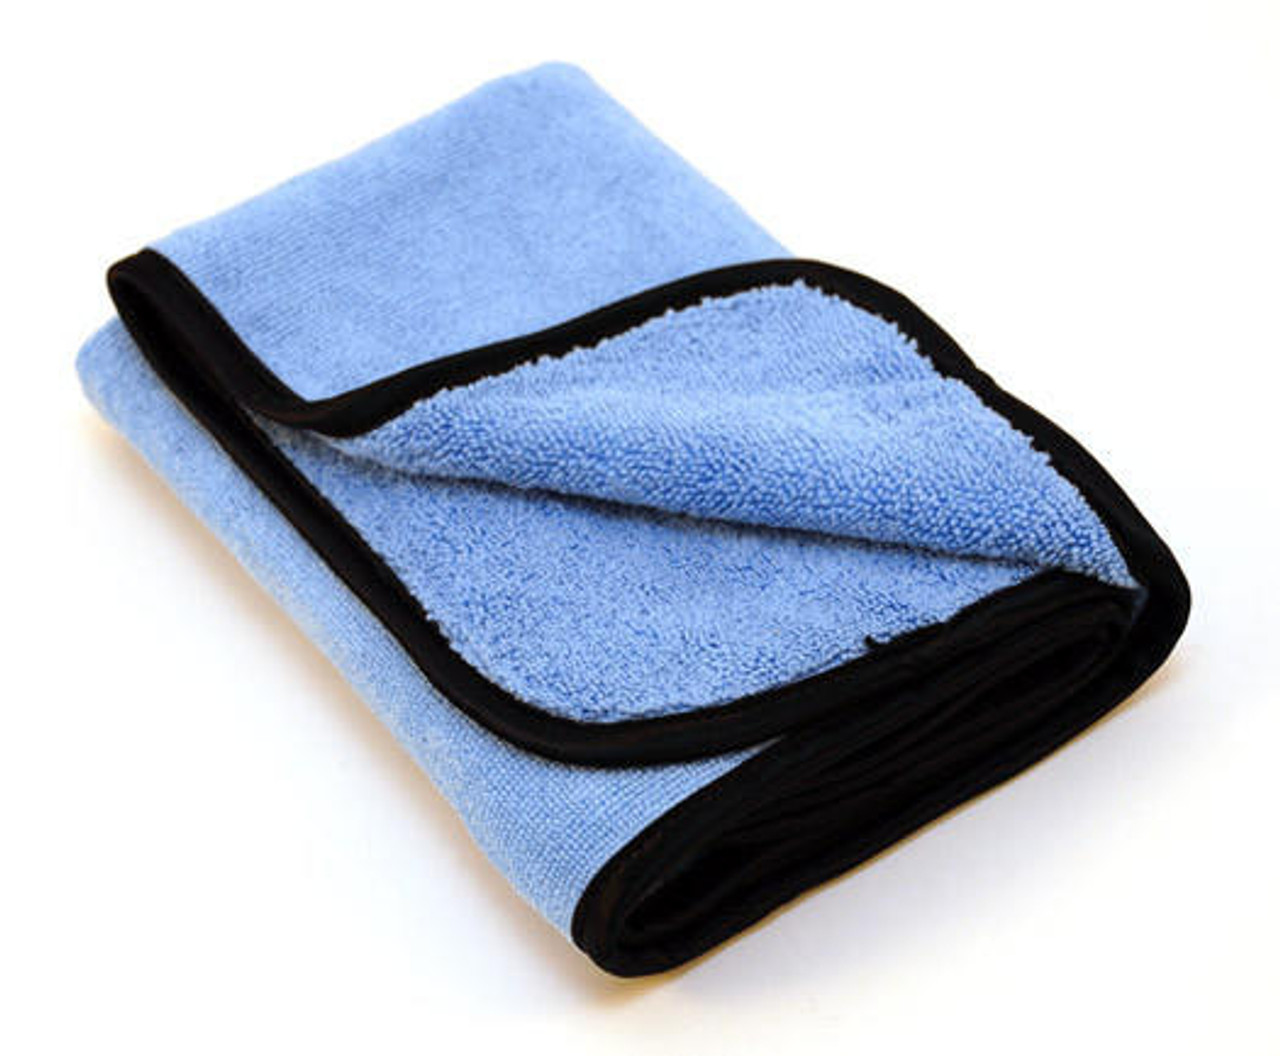 Nylon Net One Side & Microfiber Terry Cloth One Side / 2-Way Cleaning  Sponge Pad - 2 pack